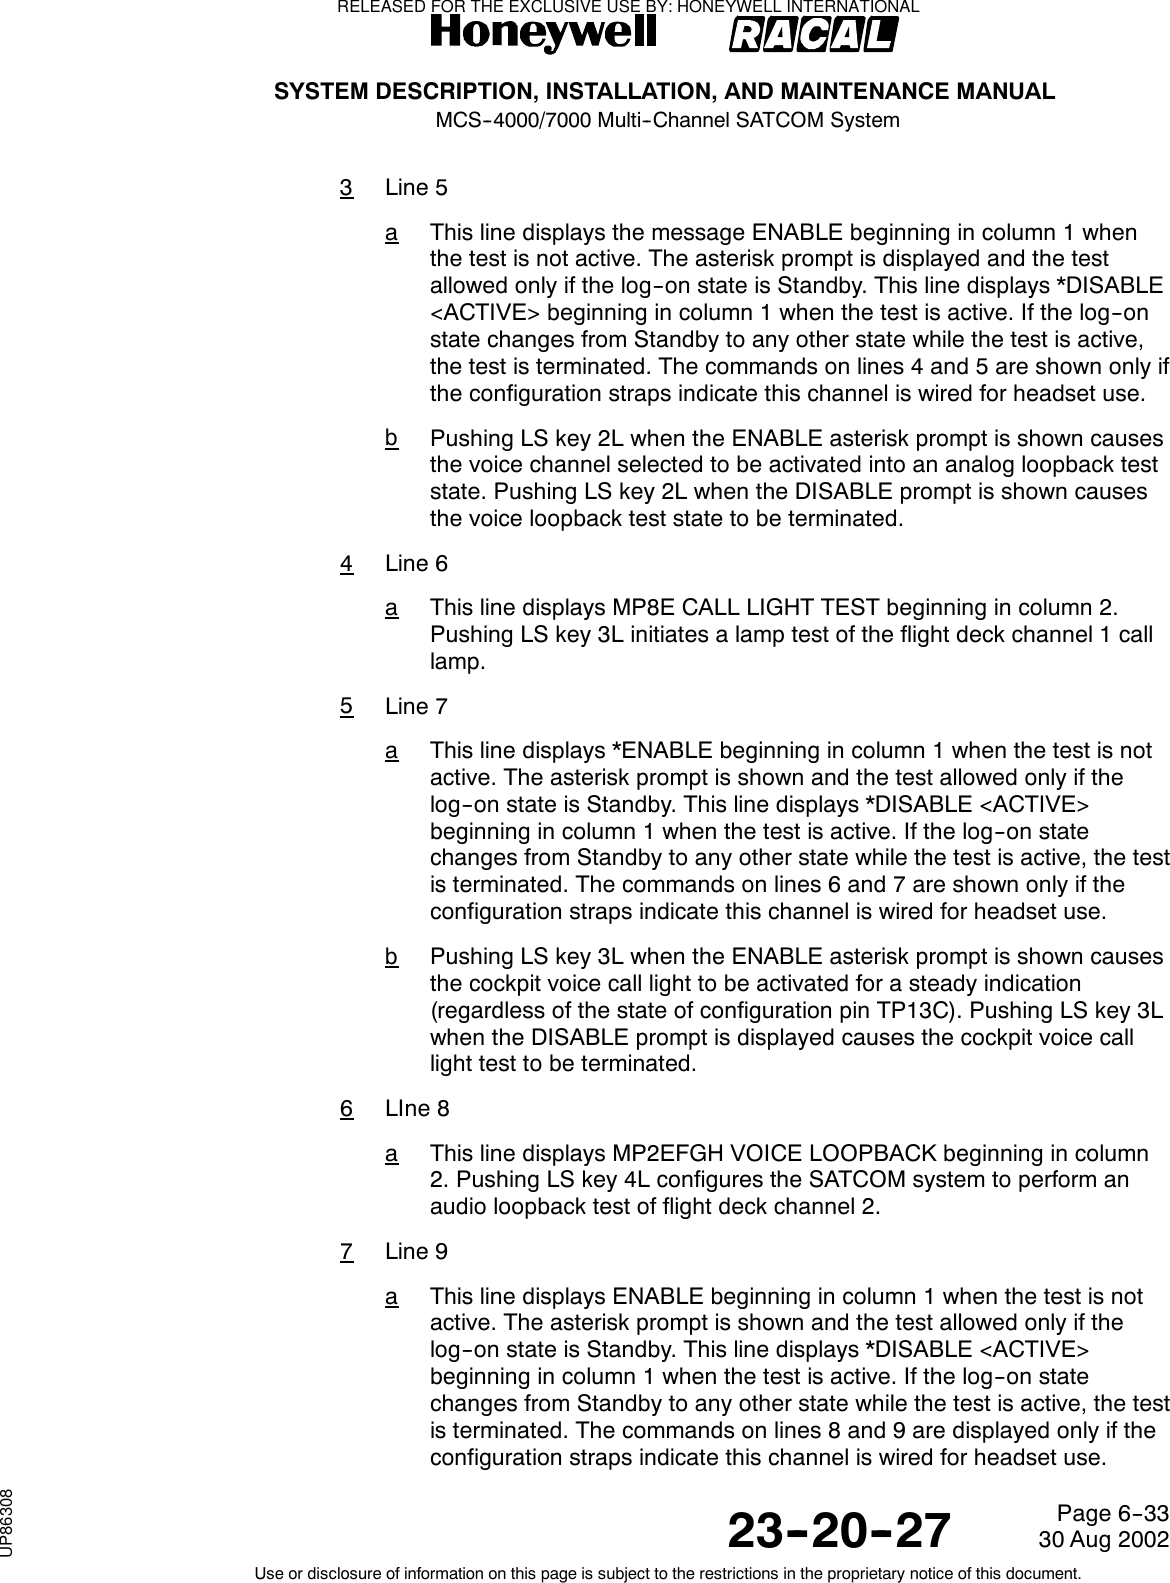 SYSTEM DESCRIPTION, INSTALLATION, AND MAINTENANCE MANUALMCS--4000/7000 Multi--Channel SATCOM System23--20--2730 Aug 2002Use or disclosure of information on this page is subject to the restrictions in the proprietary notice of this document.Page 6--333Line 5aThis line displays the message ENABLE beginning in column 1 whenthe test is not active. The asterisk prompt is displayed and the testallowed only if the log--on state is Standby. This line displays *DISABLE&lt;ACTIVE&gt; beginning in column 1 when the test is active. If the log--onstate changes from Standby to any other state while the test is active,thetestisterminated.Thecommandsonlines4and5areshownonlyifthe configuration straps indicate this channel is wired for headset use.bPushing LS key 2L when the ENABLE asterisk prompt is shown causesthe voice channel selected to be activated into an analog loopback teststate. Pushing LS key 2L when the DISABLE prompt is shown causesthe voice loopback test state to be terminated.4Line 6aThislinedisplaysMP8ECALLLIGHTTESTbeginningincolumn2.Pushing LS key 3L initiates a lamp test of the flight deck channel 1 calllamp.5Line 7aThis line displays *ENABLE beginning in column 1 when the test is notactive. The asterisk prompt is shown and the test allowed only if thelog--on state is Standby. This line displays *DISABLE &lt;ACTIVE&gt;beginning in column 1 when the test is active. If the log--on statechanges from Standby to any other state while the test is active, the testis terminated. The commands on lines 6 and 7 are shown only if theconfiguration straps indicate this channel is wired for headset use.bPushing LS key 3L when the ENABLE asterisk prompt is shown causesthe cockpit voice call light to be activated for a steady indication(regardless of the state of configuration pin TP13C). Pushing LS key 3Lwhen the DISABLE prompt is displayed causes the cockpit voice calllight test to be terminated.6LIne 8aThis line displays MP2EFGH VOICE LOOPBACK beginning in column2. Pushing LS key 4L configures the SATCOM system to perform anaudio loopback test of flight deck channel 2.7Line 9aThis line displays ENABLE beginning in column 1 when the test is notactive. The asterisk prompt is shown and the test allowed only if thelog--on state is Standby. This line displays *DISABLE &lt;ACTIVE&gt;beginning in column 1 when the test is active. If the log--on statechanges from Standby to any other state while the test is active, the testis terminated. The commands on lines 8 and 9 are displayed only if theconfiguration straps indicate this channel is wired for headset use.RELEASED FOR THE EXCLUSIVE USE BY: HONEYWELL INTERNATIONALUP86308